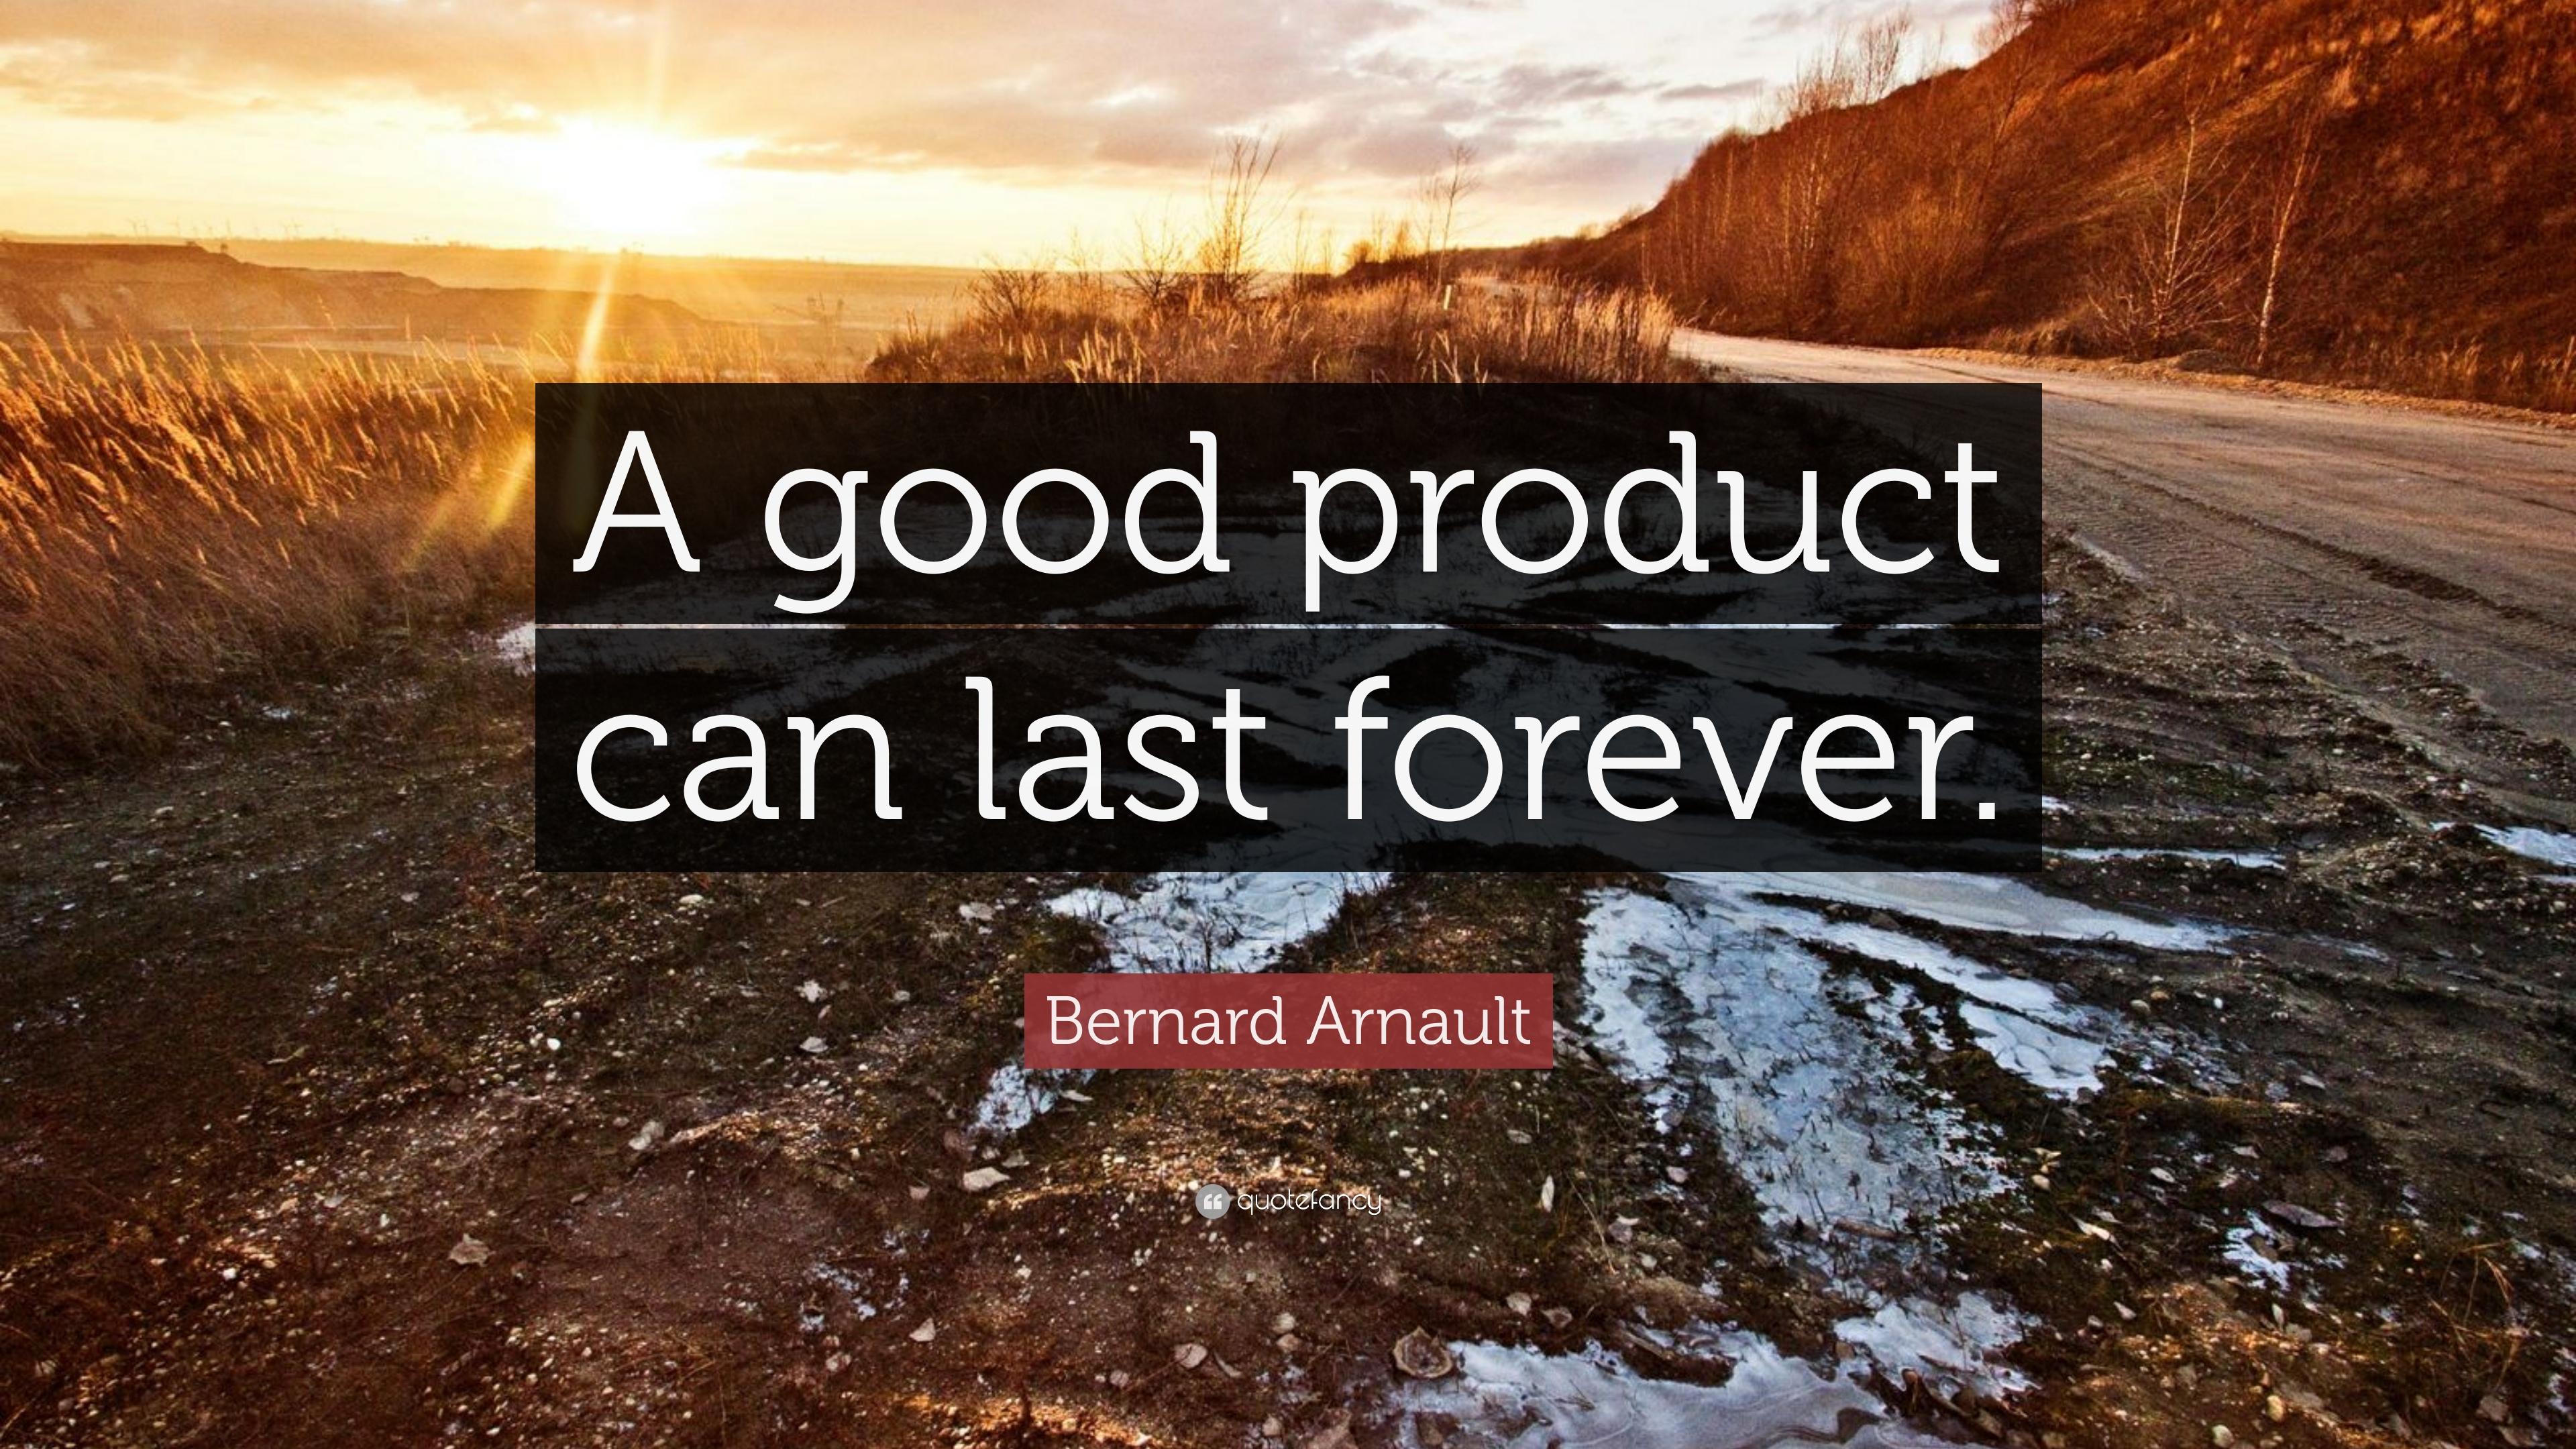 Bernard Arnault Quote: “A good product can last forever.” 7